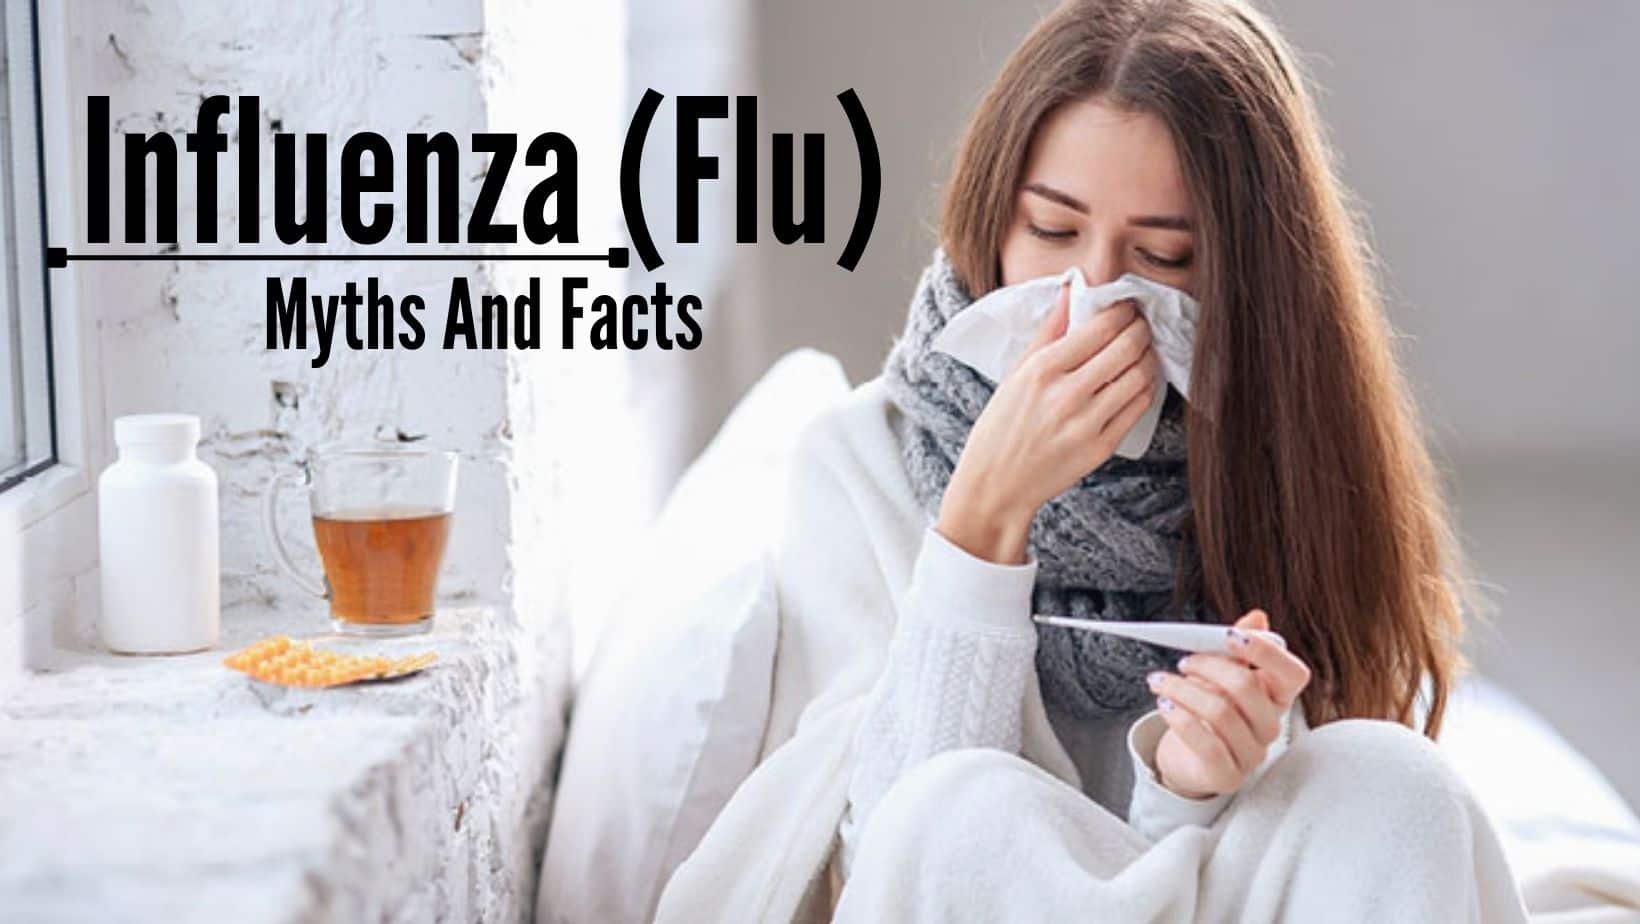 Is One Flu Shot Enough For Life? Doctor Decodes Myths And Facts About Influenza (Flu)